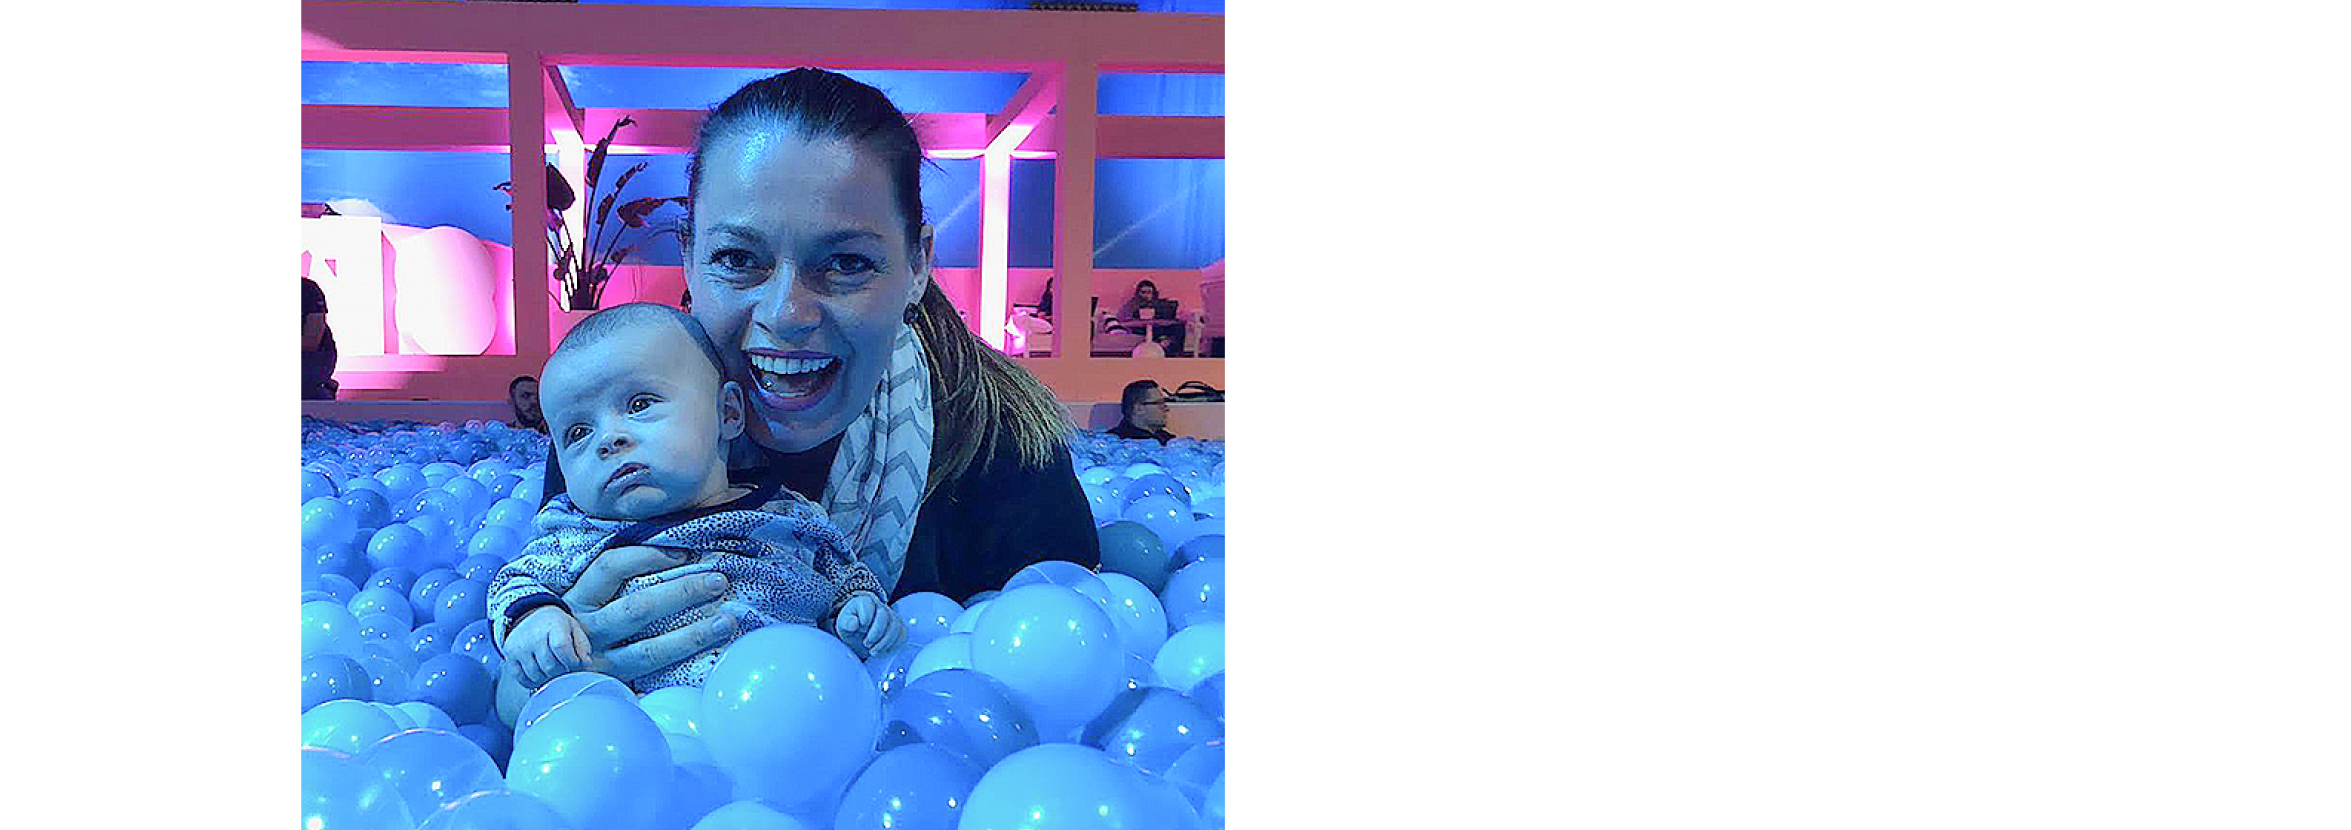 Sally at Xerocon sits with six-week-old son Matthew in a playing ball pit.